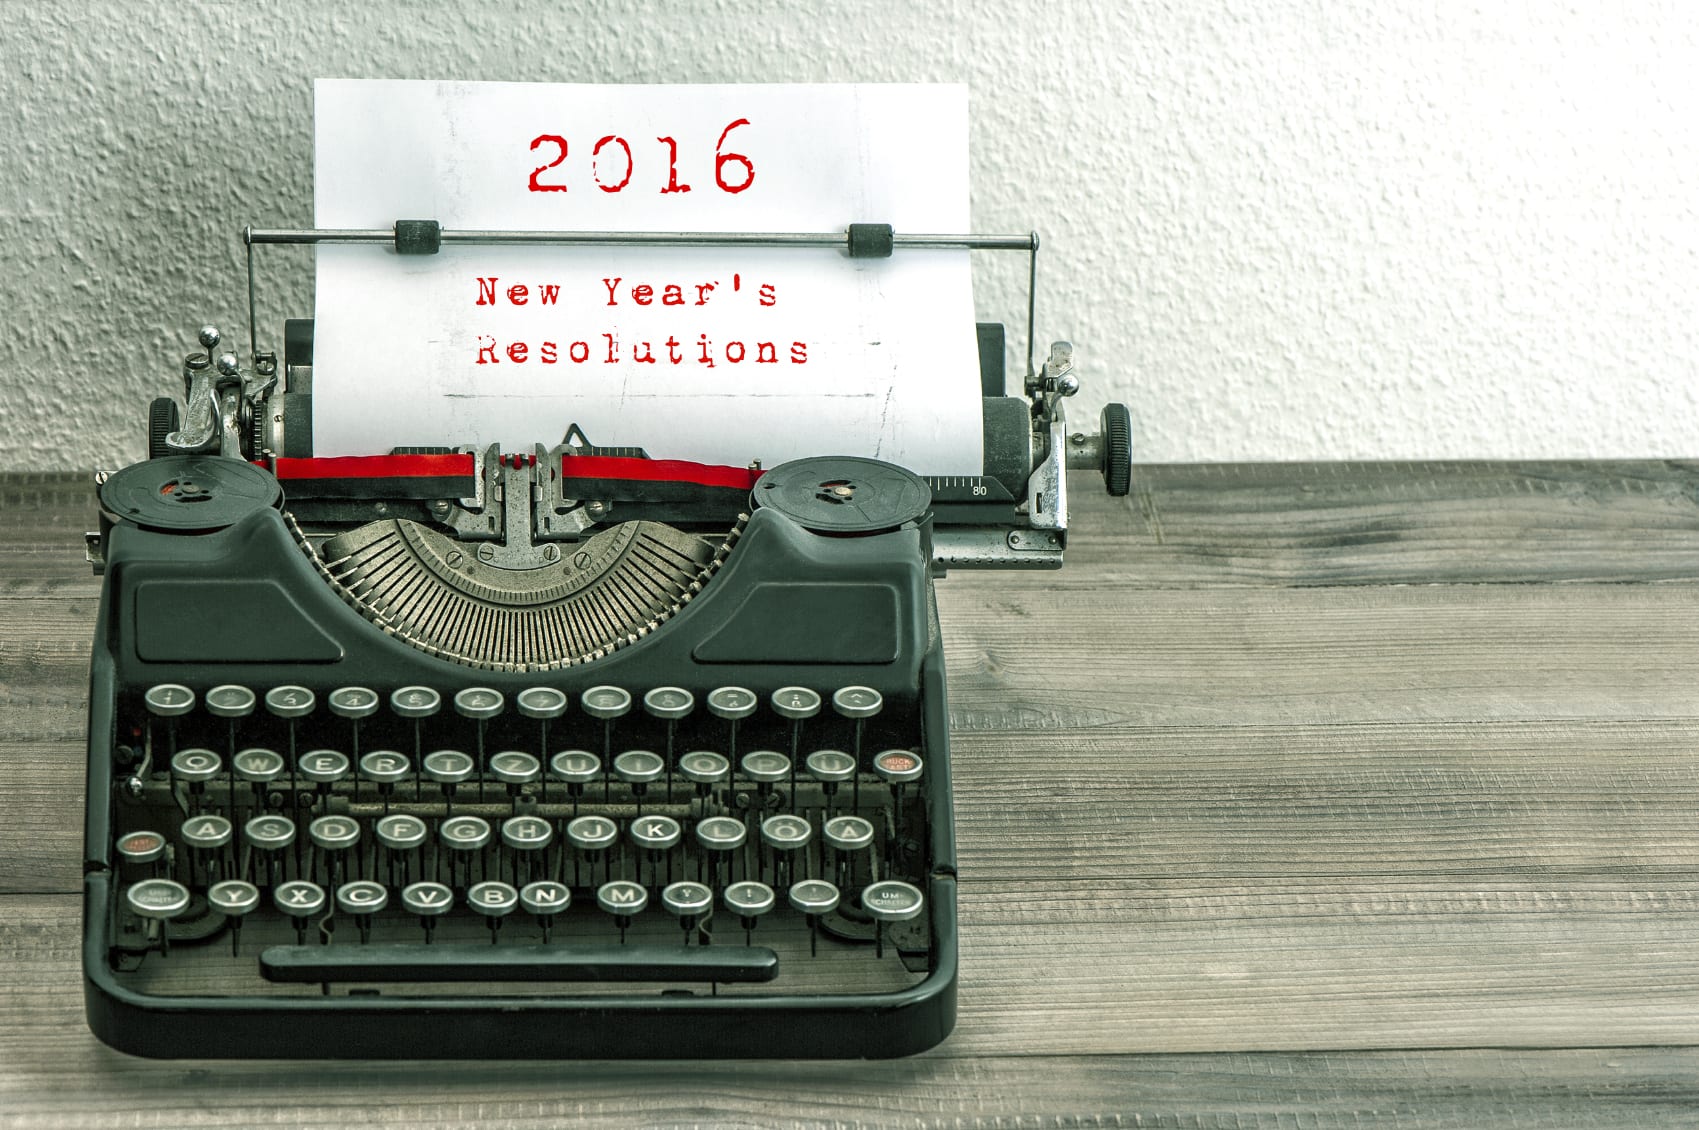 5 More Small Business Resolutions for 2016